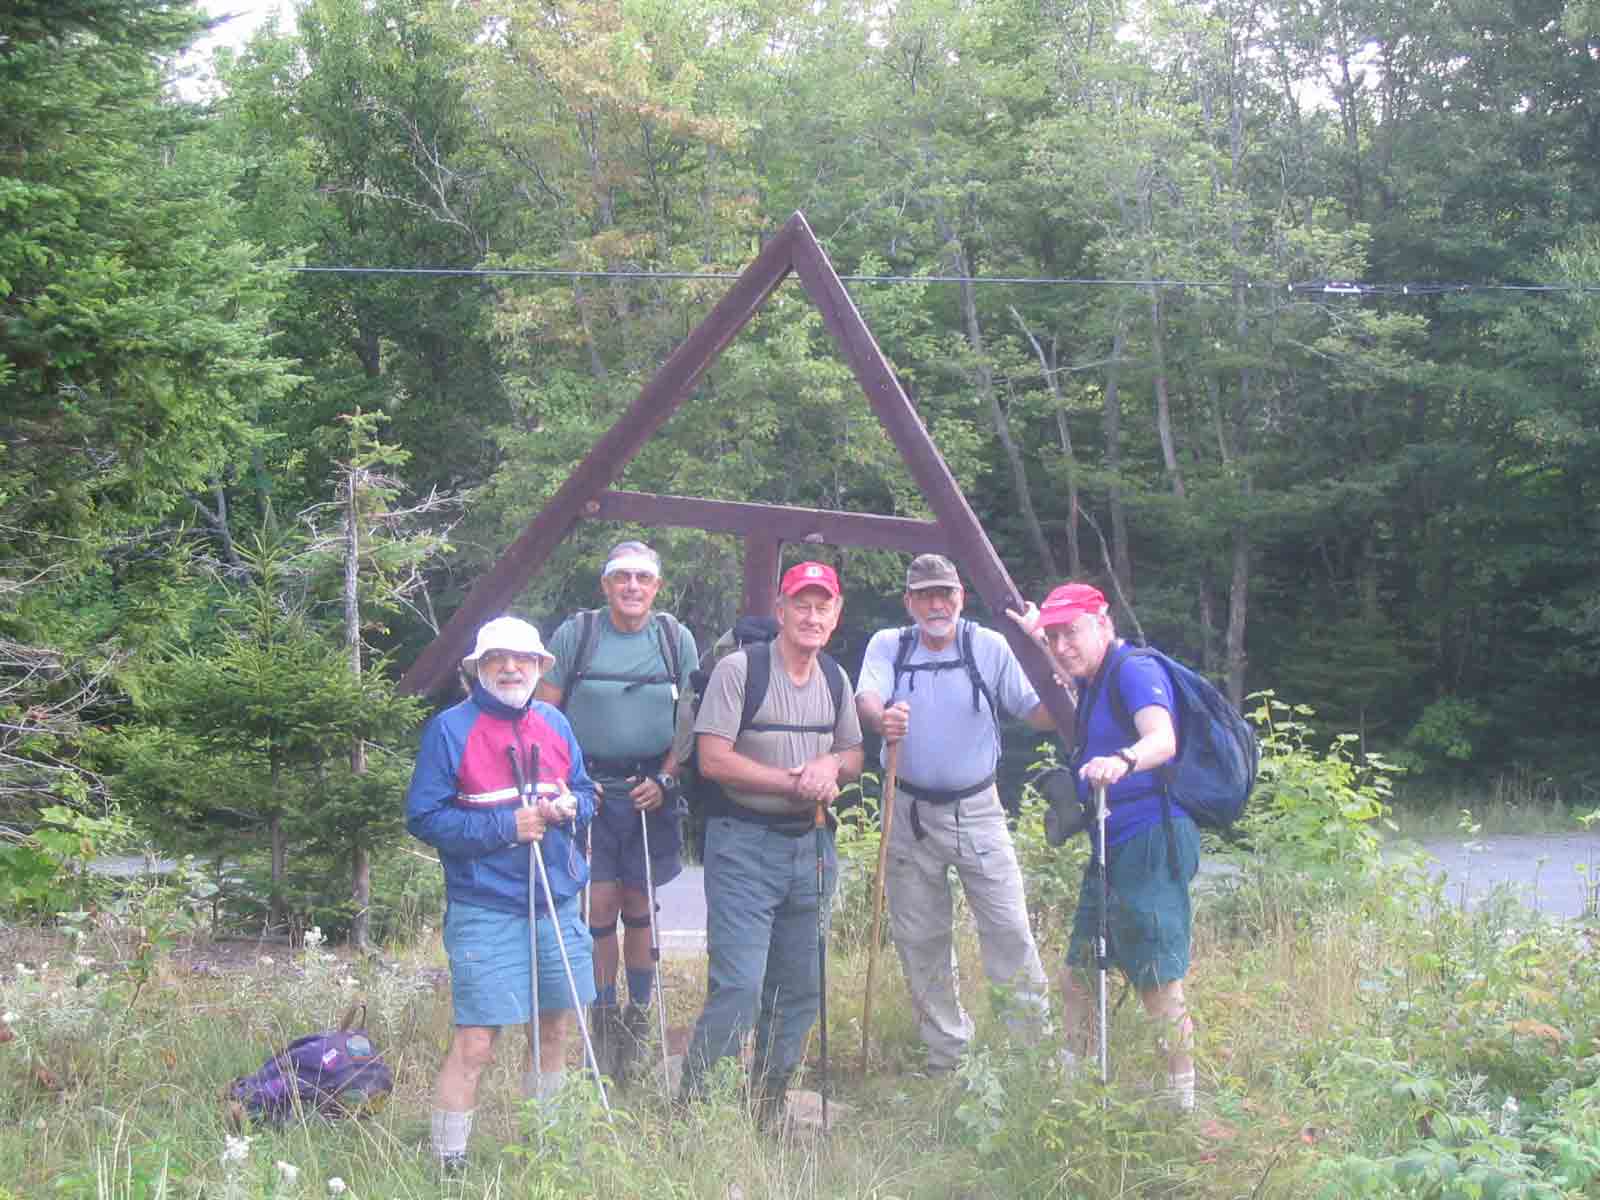 32.2 MM. This group photo was taken in the parking lot next to the big wooden AT icon just off ME 4. Parking is on the left side of the highway when approaching from Phillips. From here it is 12 miles south to Phillips and 9 miles north to Rangeley. Courtesy askus3@optonline.net